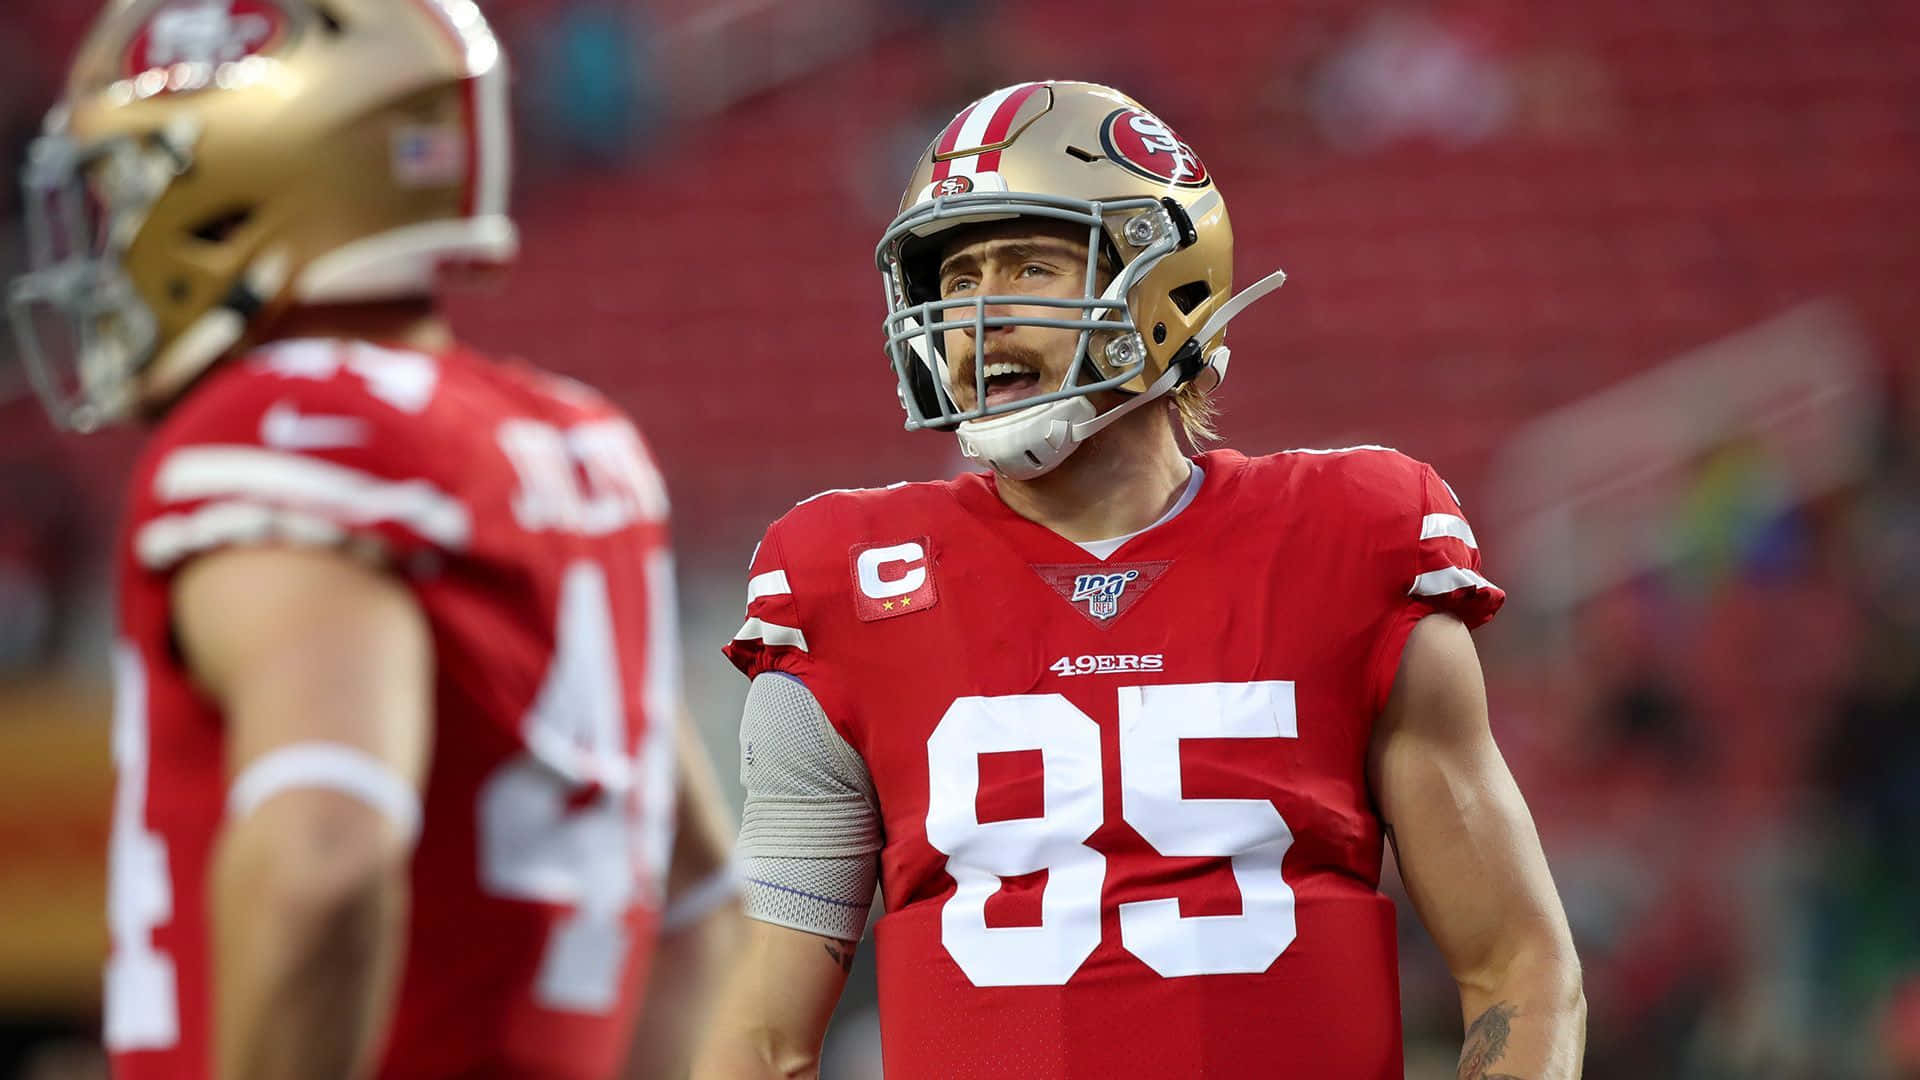 49ers Kittle displays new ink of Master Chief from Halo videogame